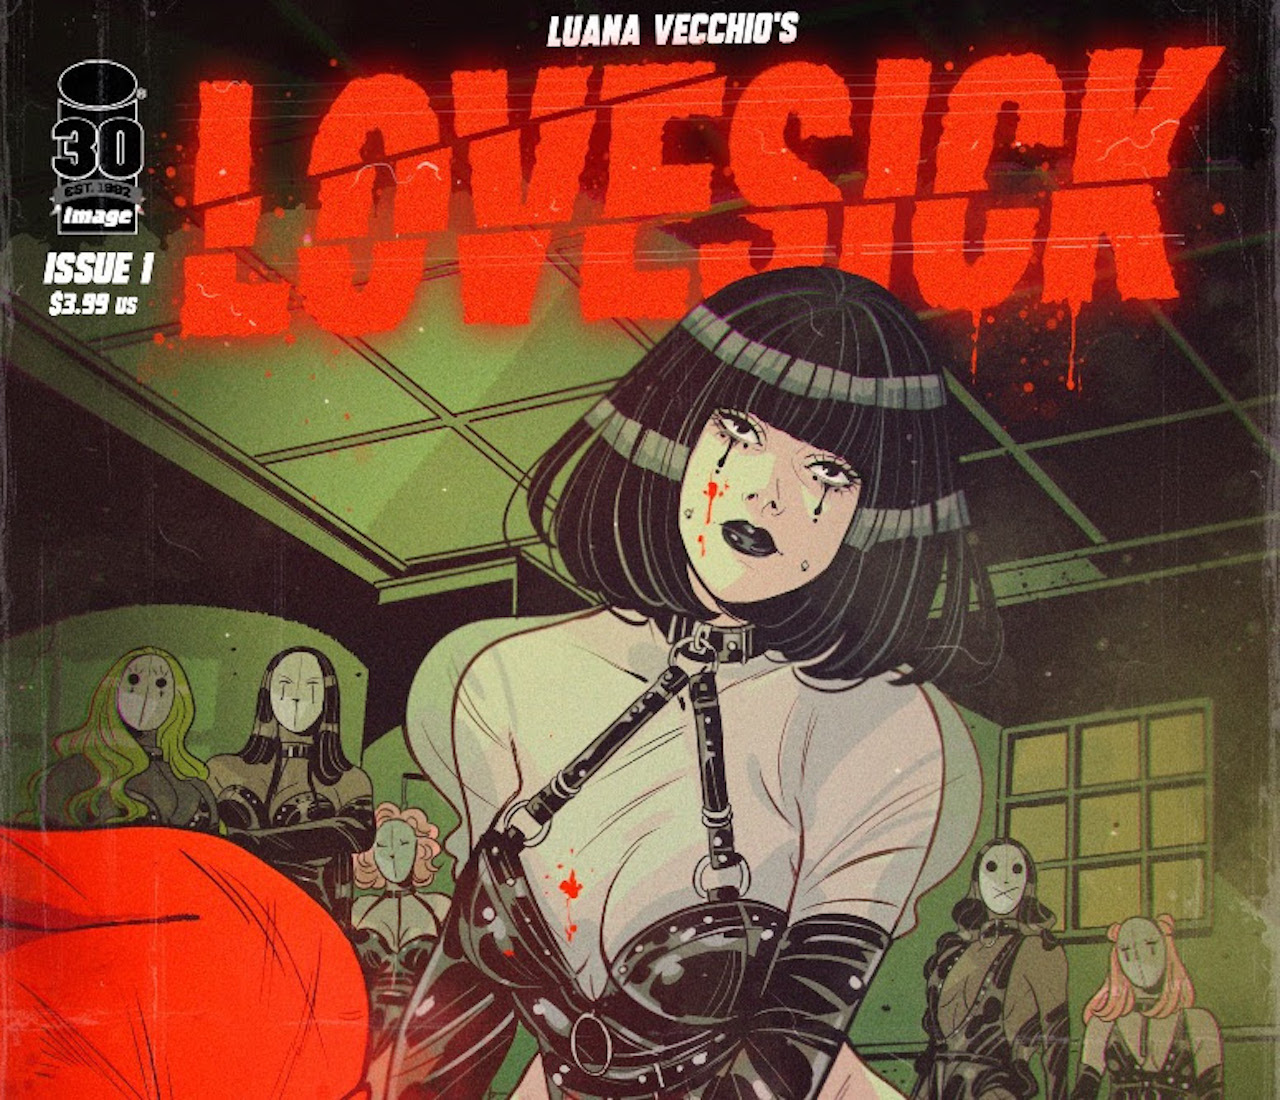 'Lovesick' #1 is an examination of misogyny, loneliness, and brutality